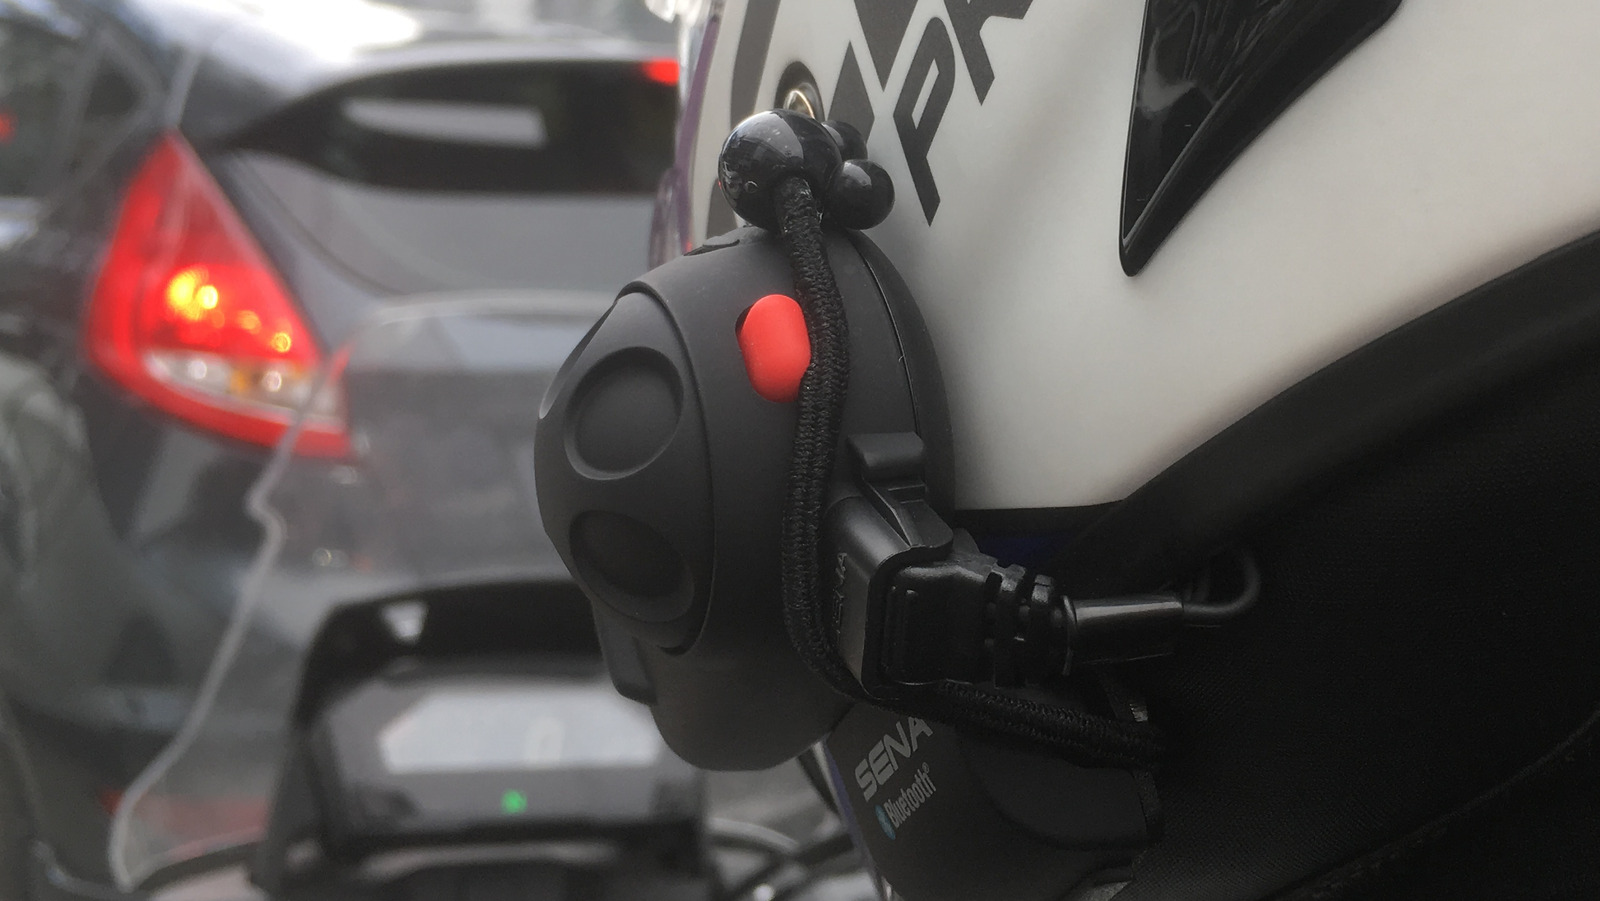 5 Of The Best Bluetooth Headsets For Your Motorcycle Helmet – SlashGear